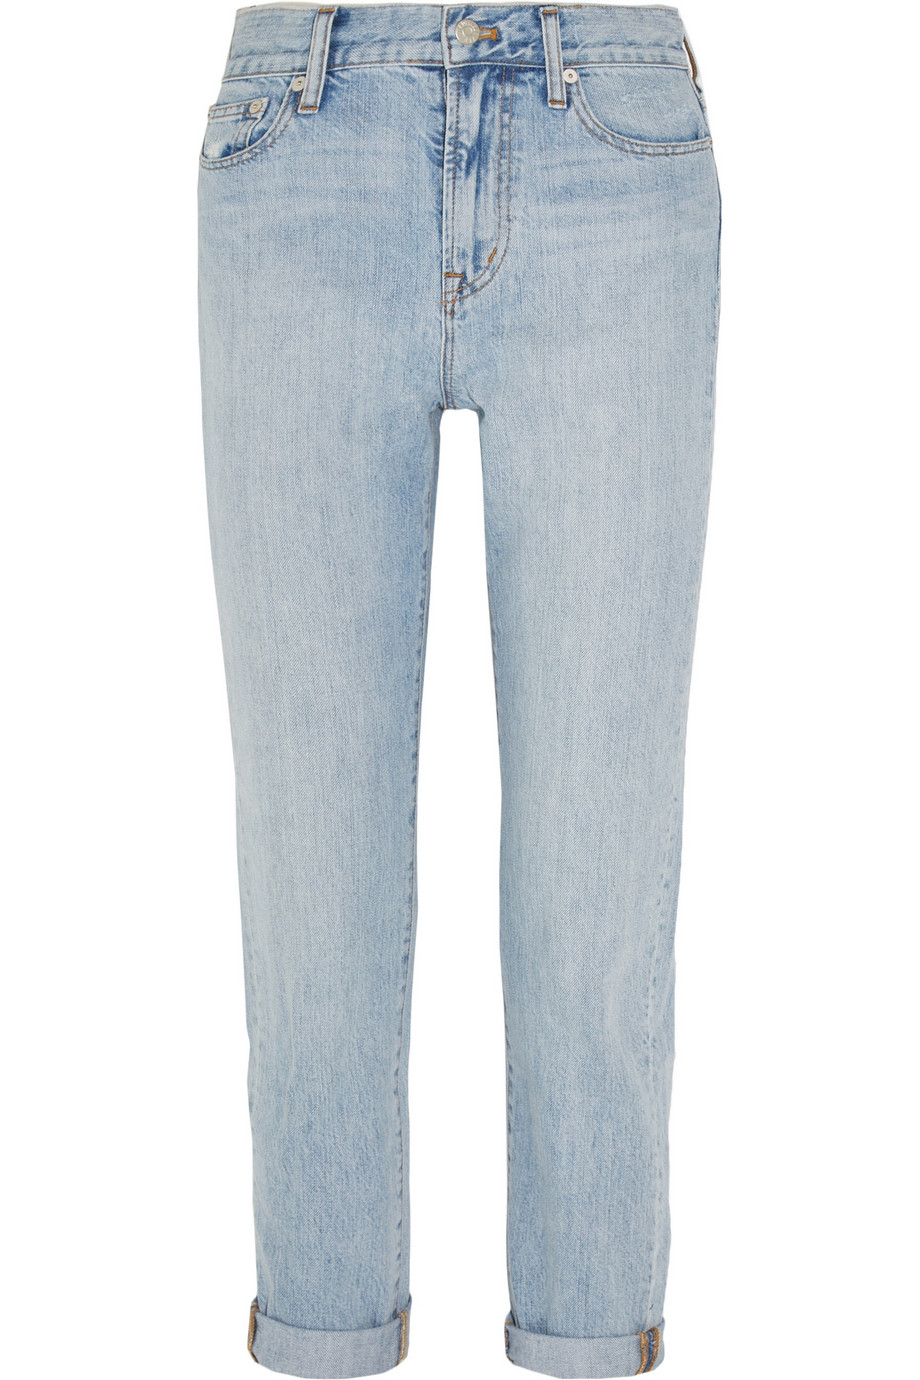 MADEWELL JEANS